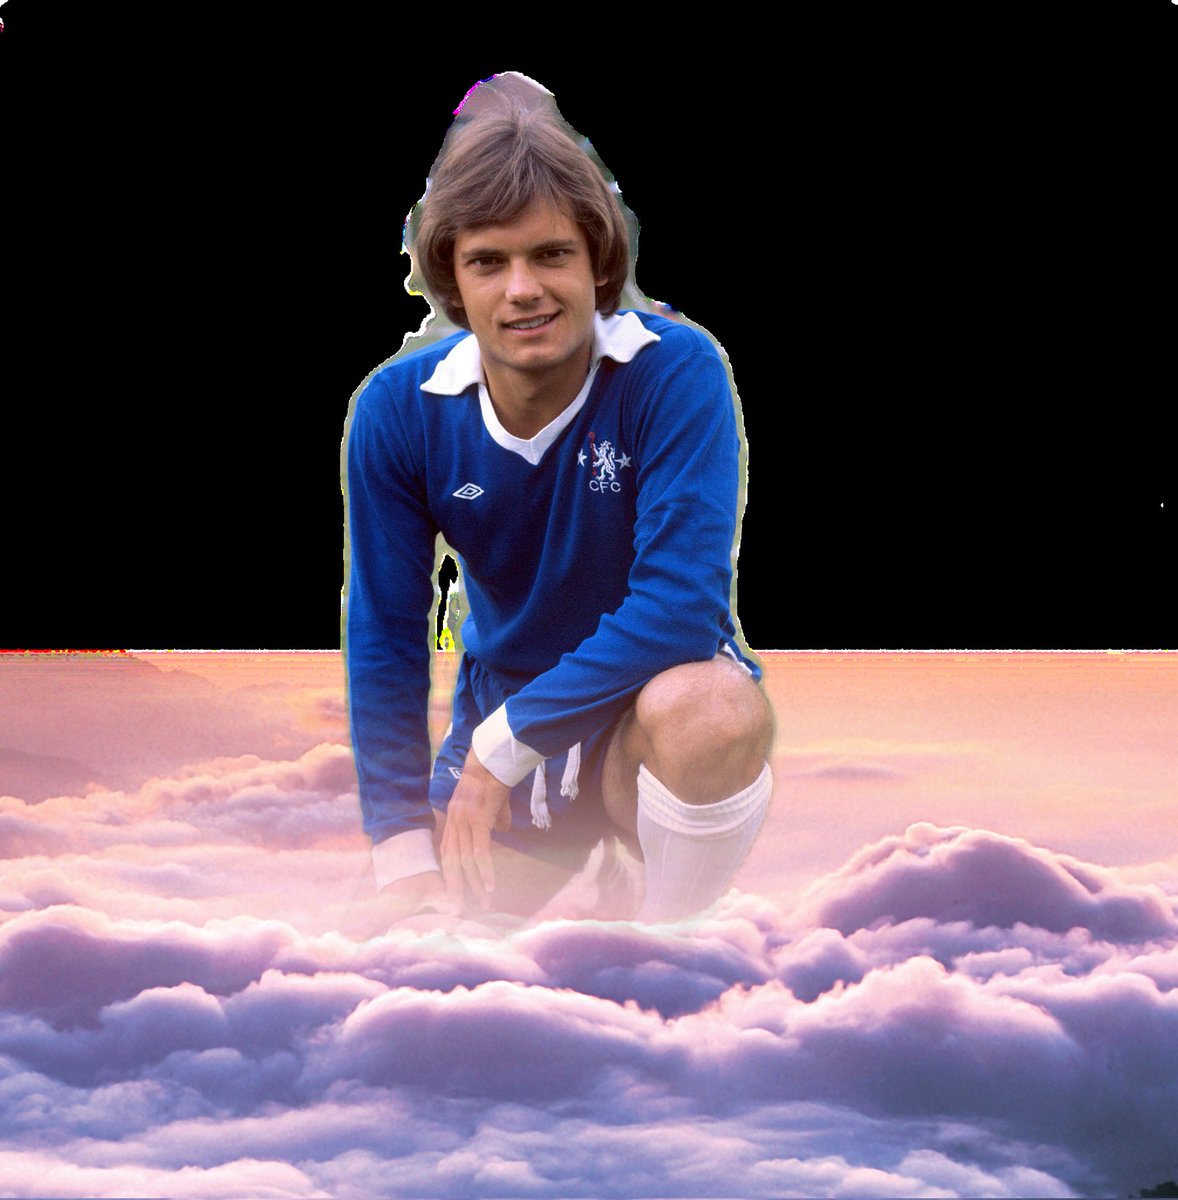 RIP legend #RayWilkins 💙 you will forever be in our hearts 💙